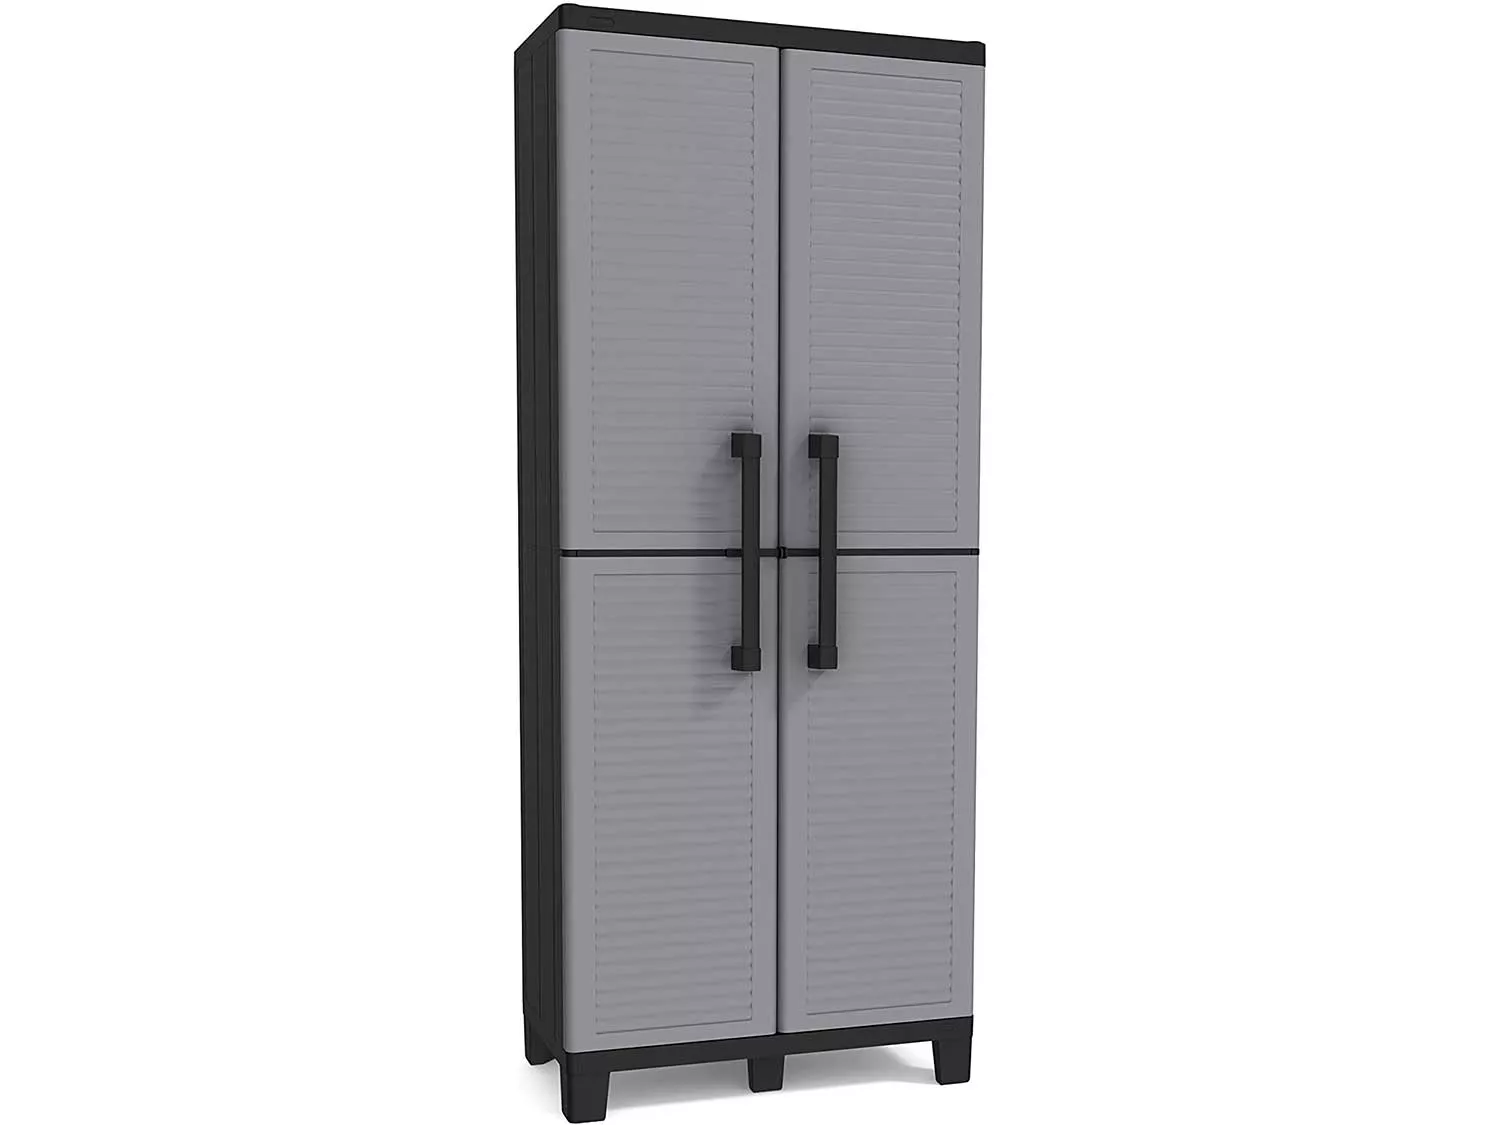 KETER Storage Cabinet with Doors and Shelves-Perfect for Garage and Basement Organization, Grey